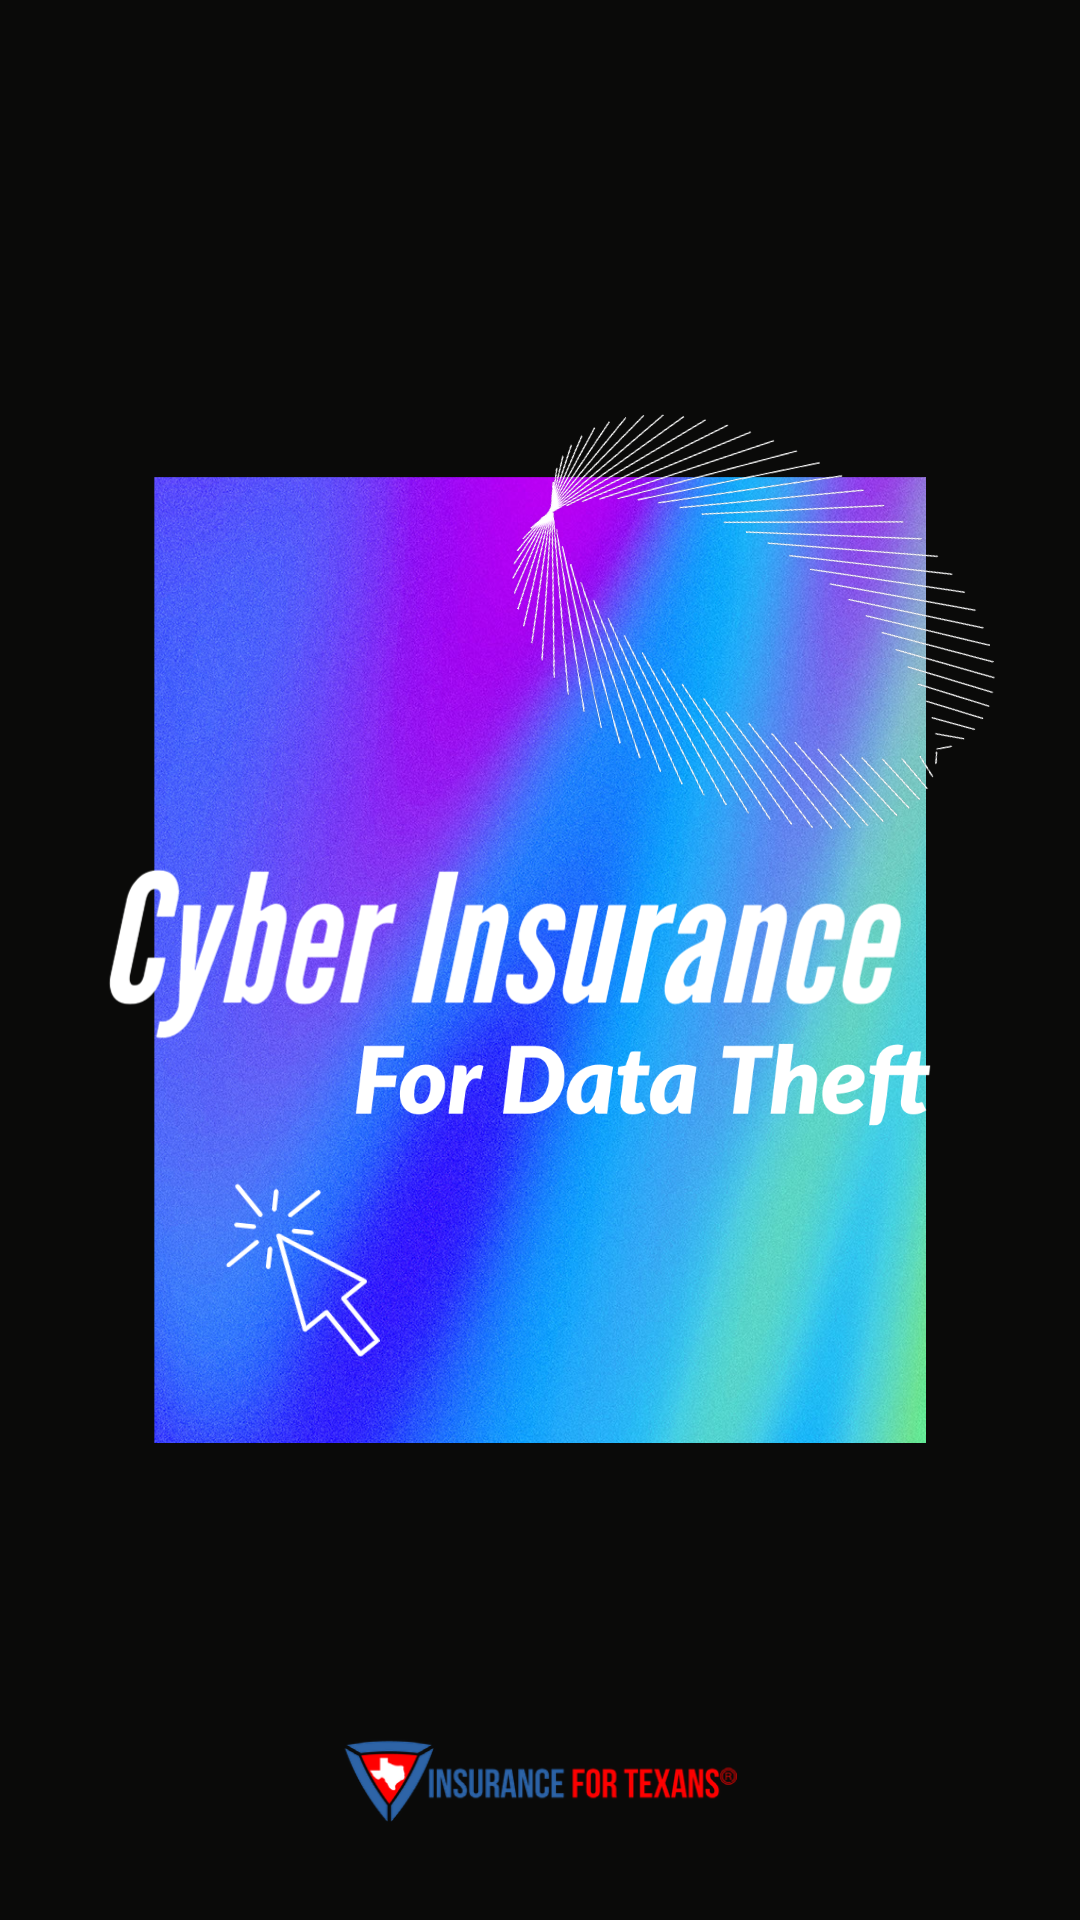 Cyber Insurance for Data Theft